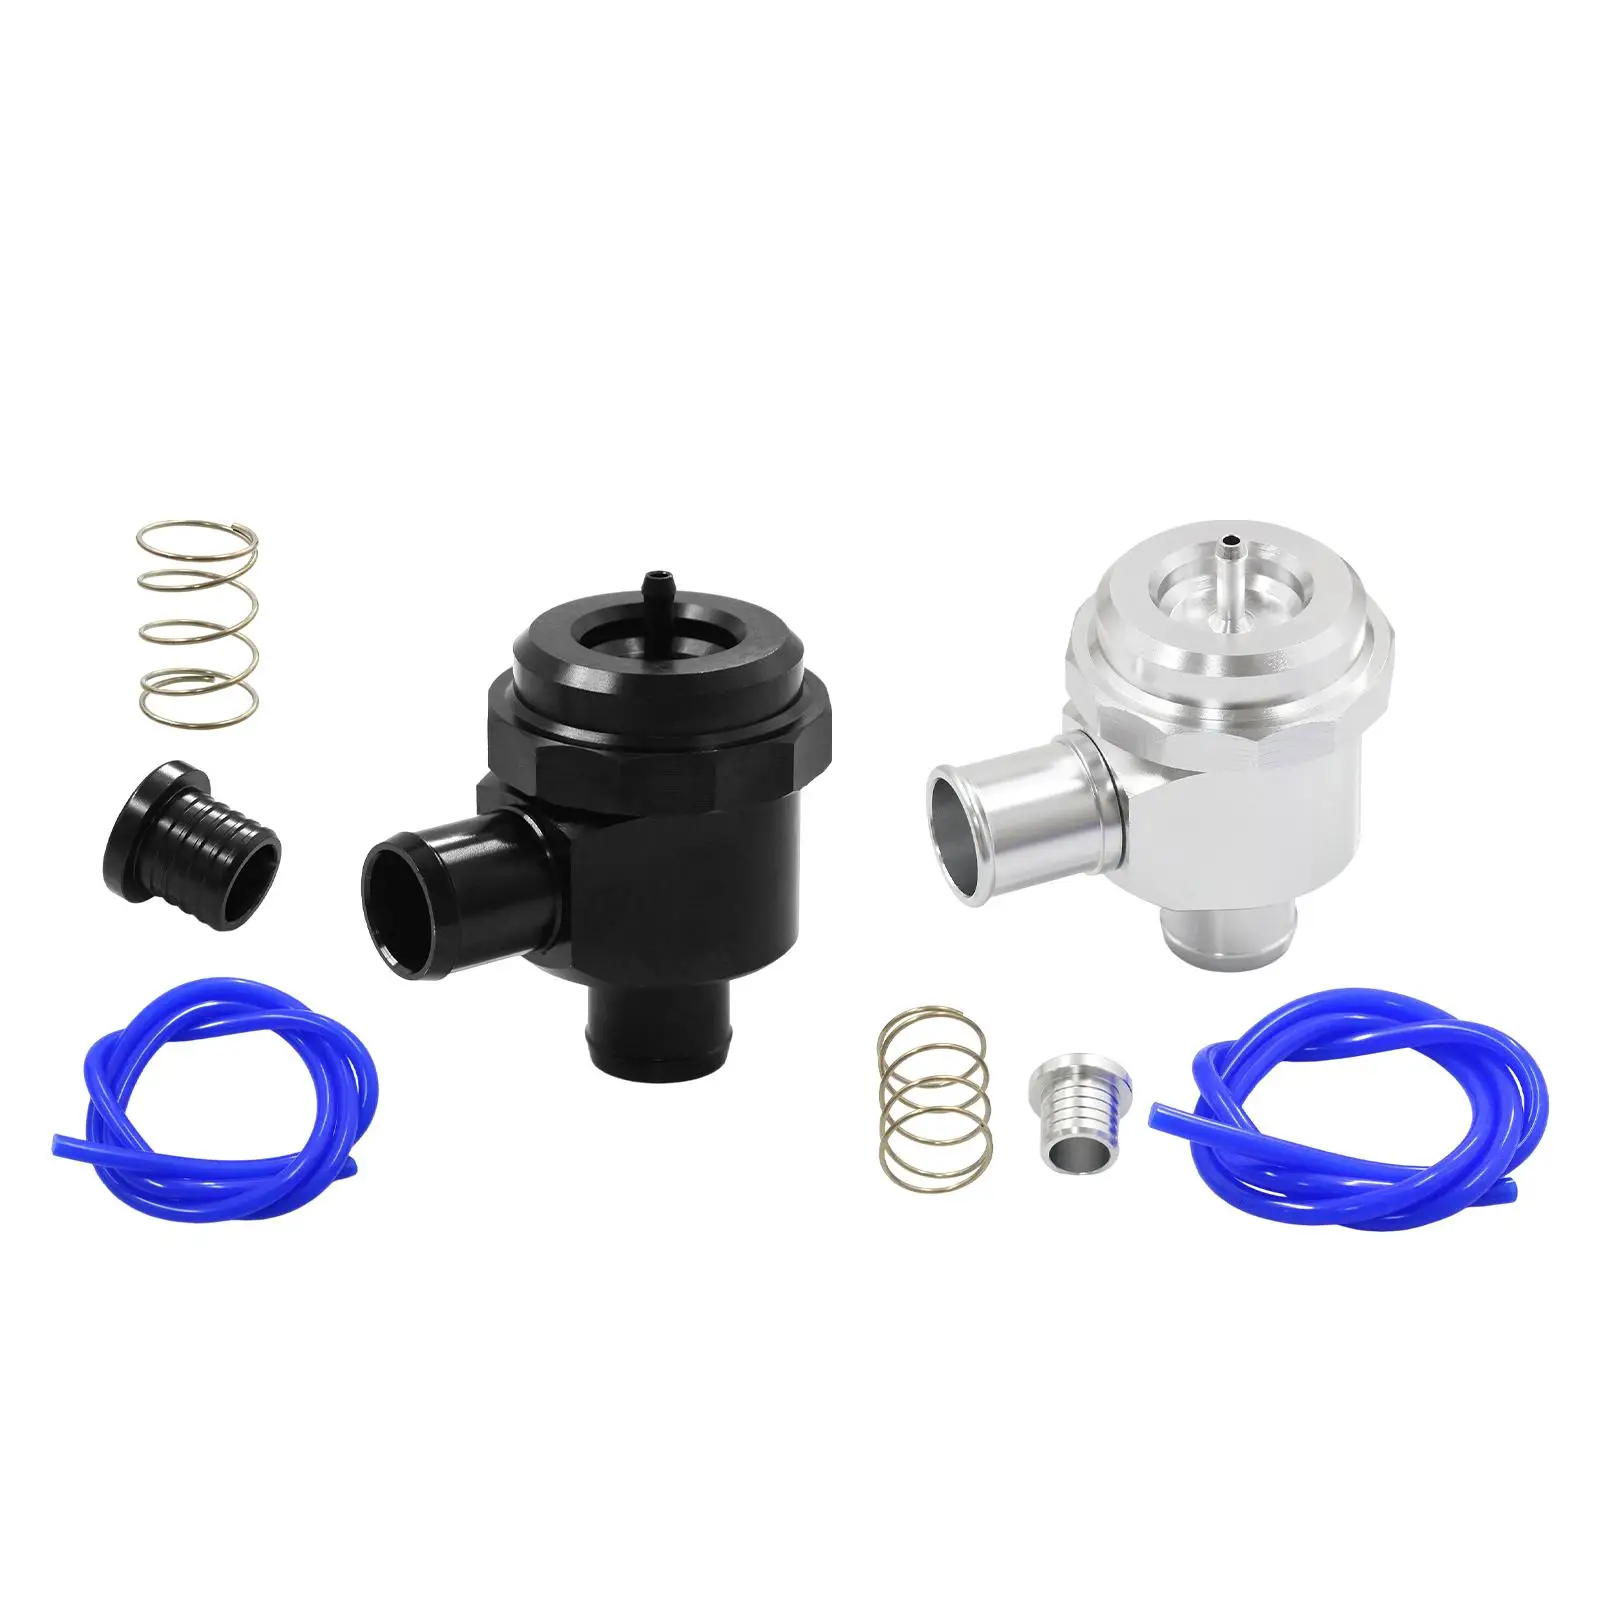 Diverter Blow Off Valve Spare Parts Heavy Duty High Performance Multifunction Durable Professional for Car Accessories